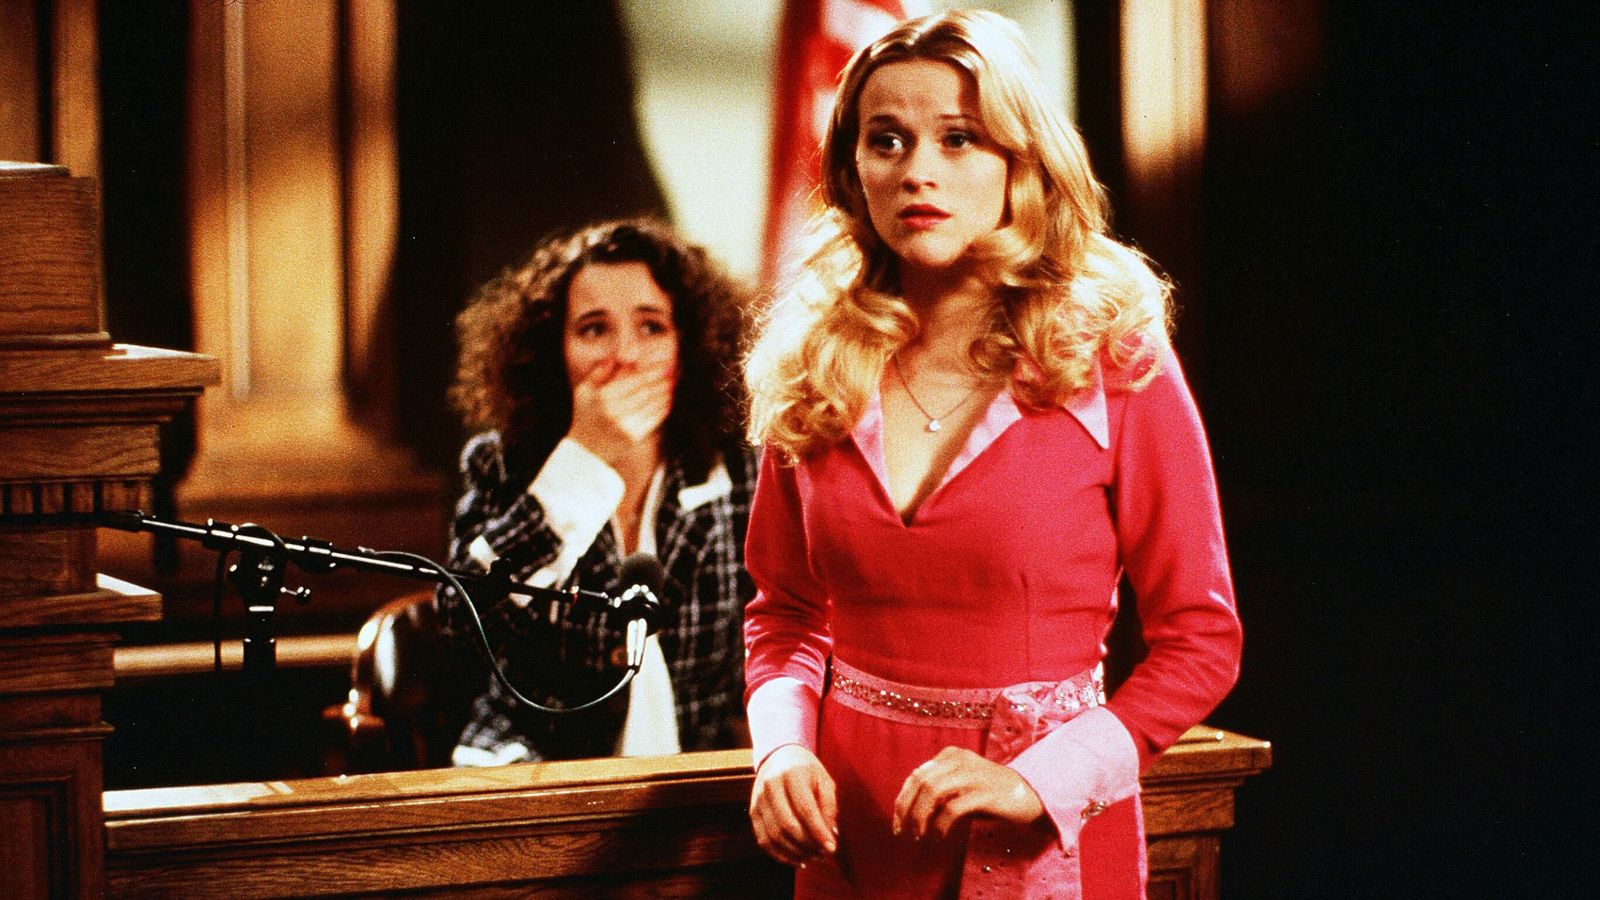 Legally Blonde prequel announced by Reese Witherspoon - following Elle Woods in the '90s